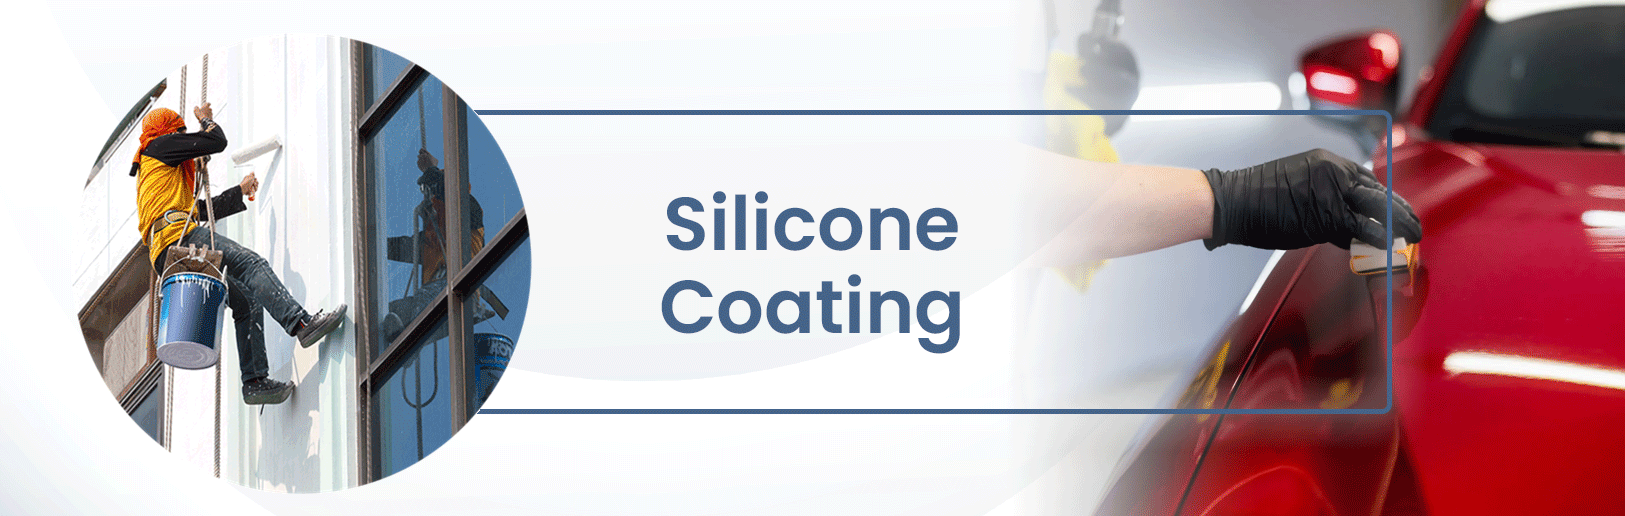 Silicone Coating﻿ Resin